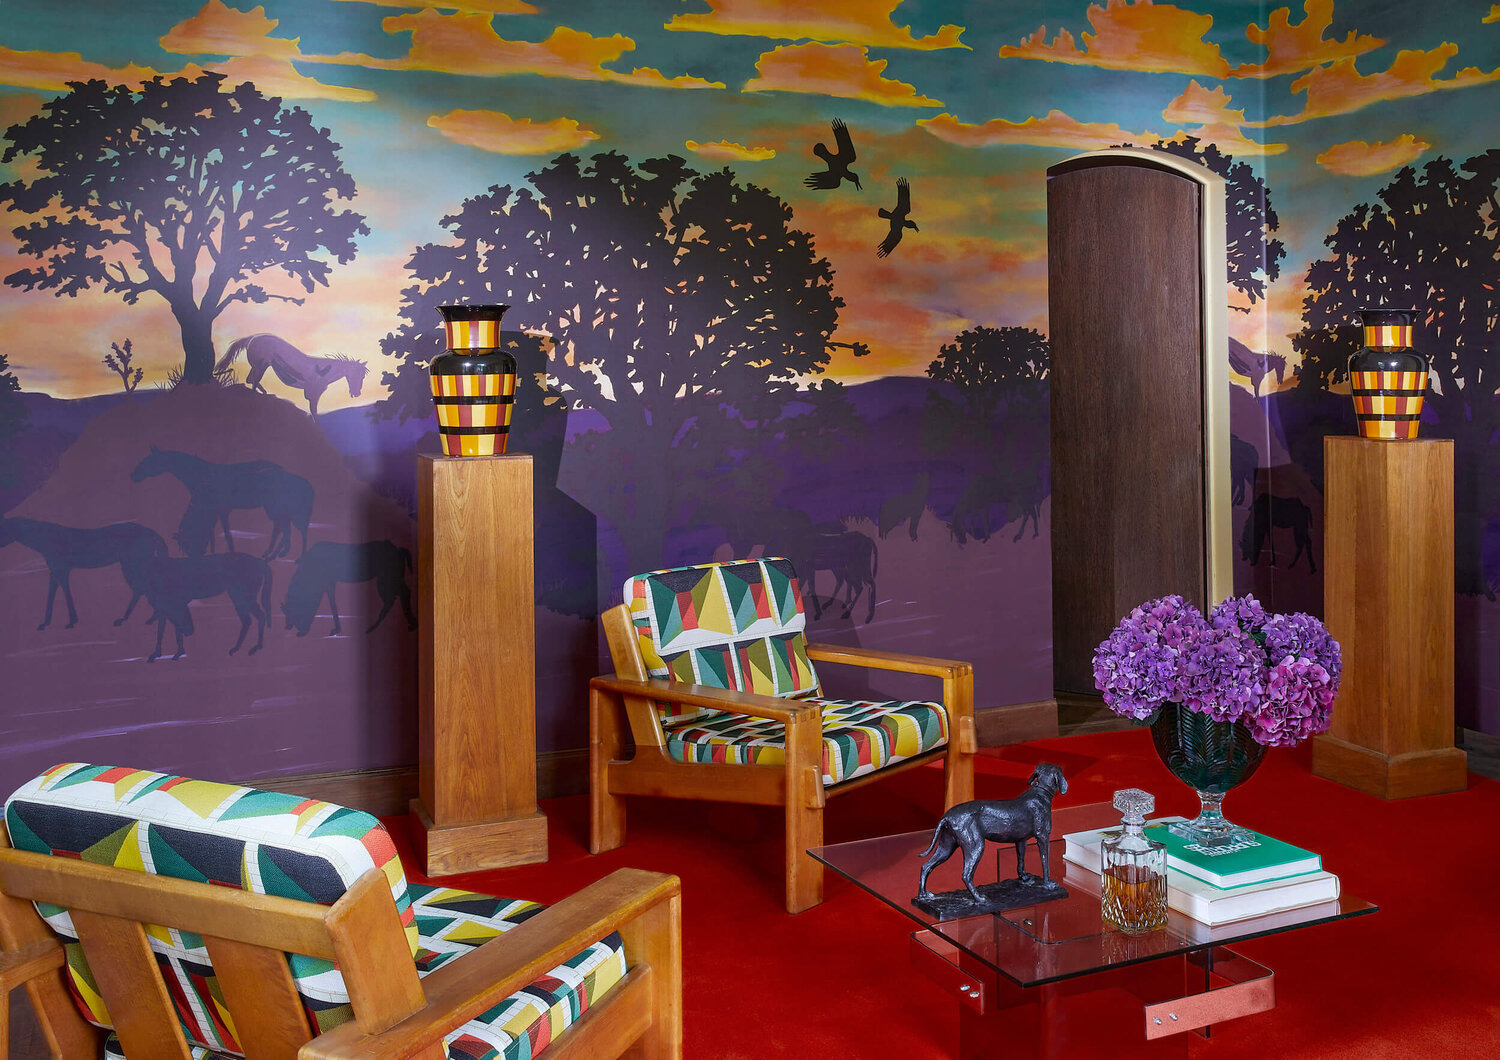 Wallcovering that appears to be a colorful scene of horse, birds, trees, hills and sky.